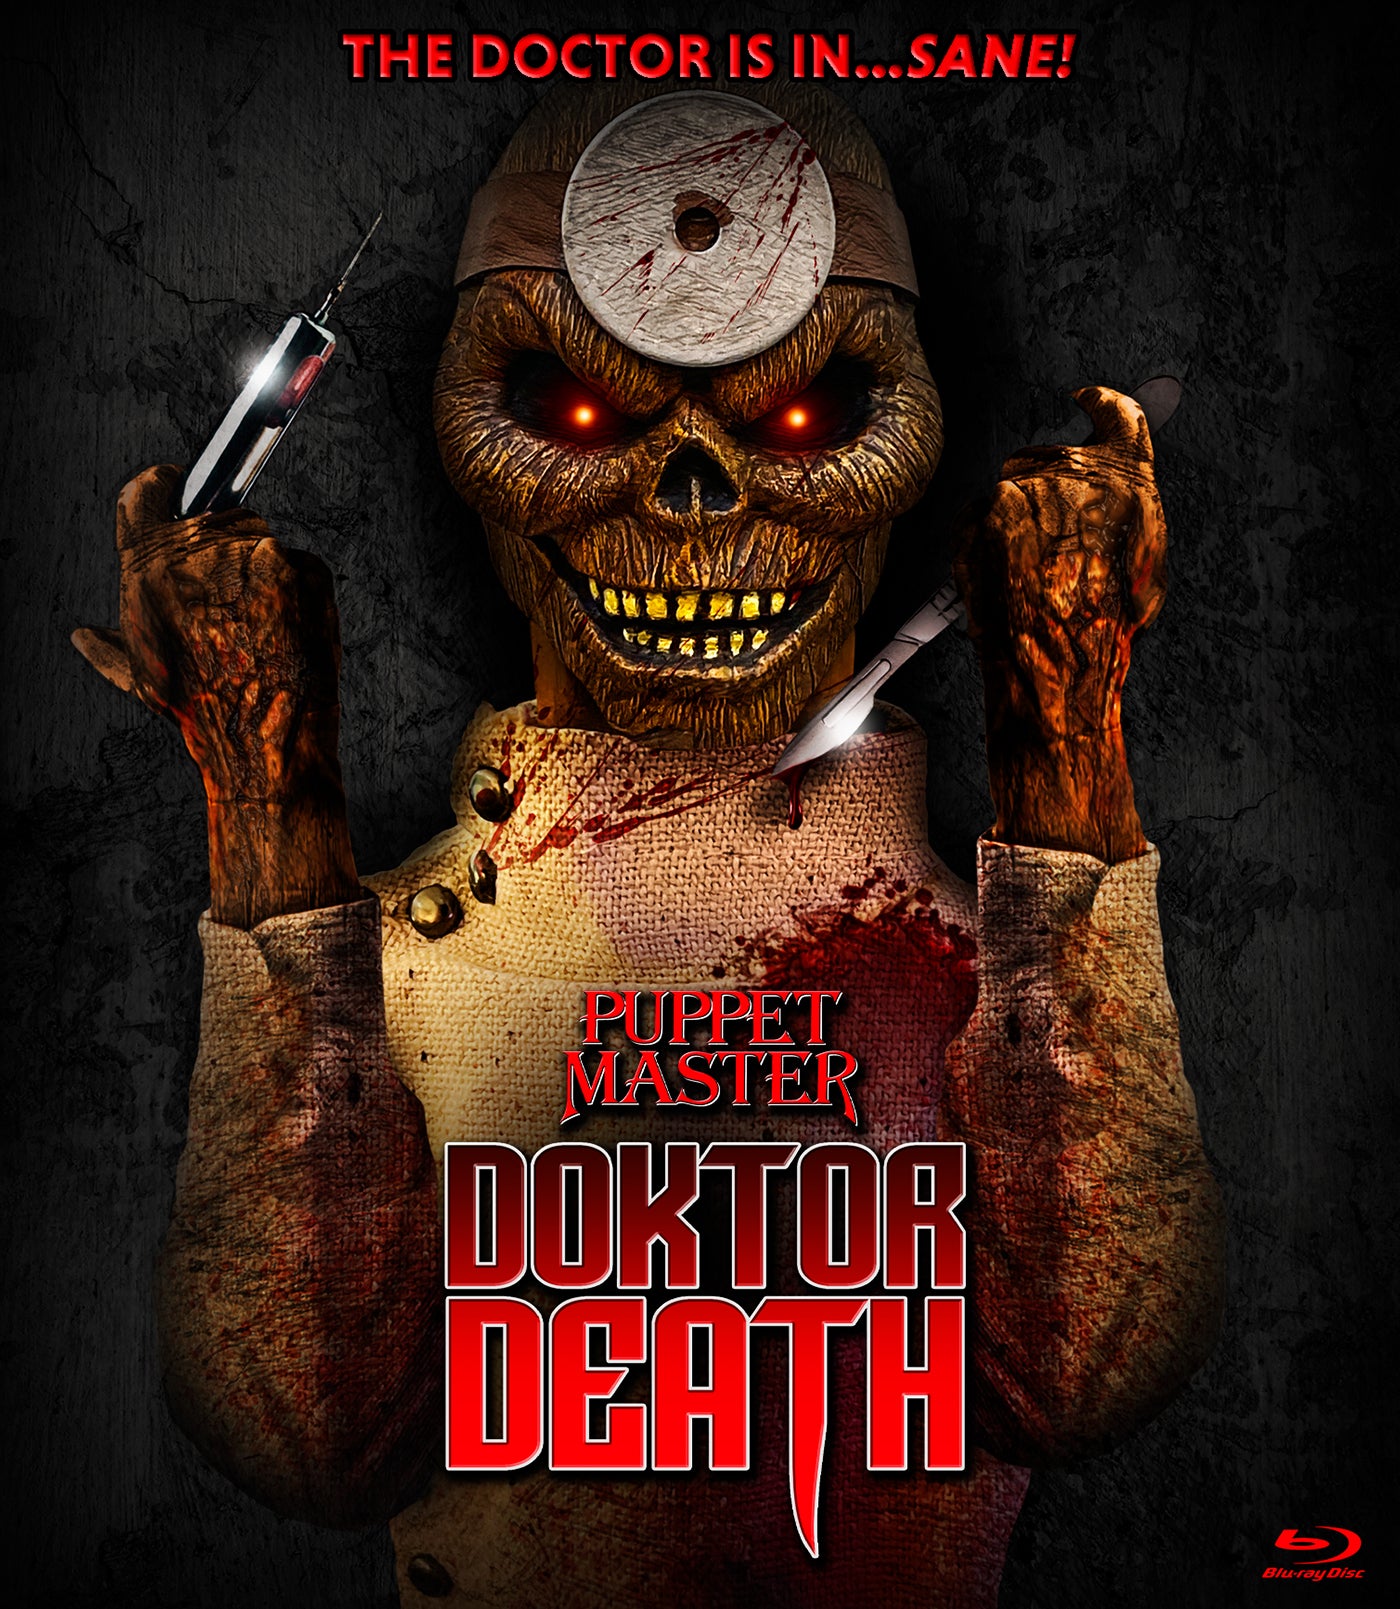 Puppet Master: Doktor Death [Blu-ray] cover art